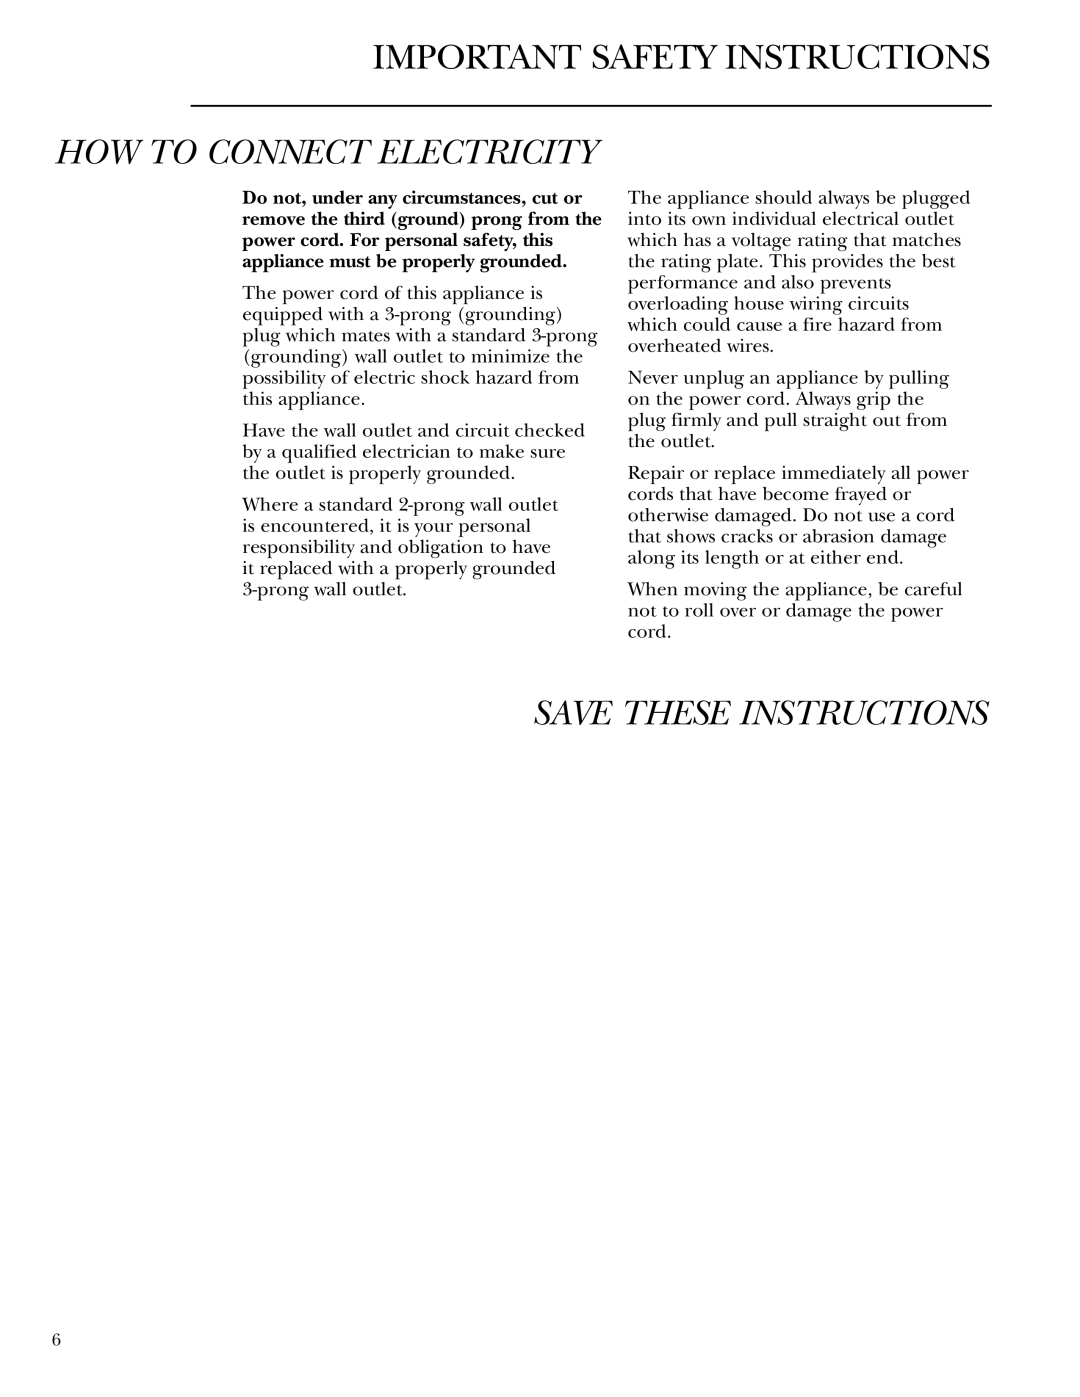 GE Monogram ZDBT210 owner manual How To Connect Electricity, Save These Instructions, Important Safety Instructions 